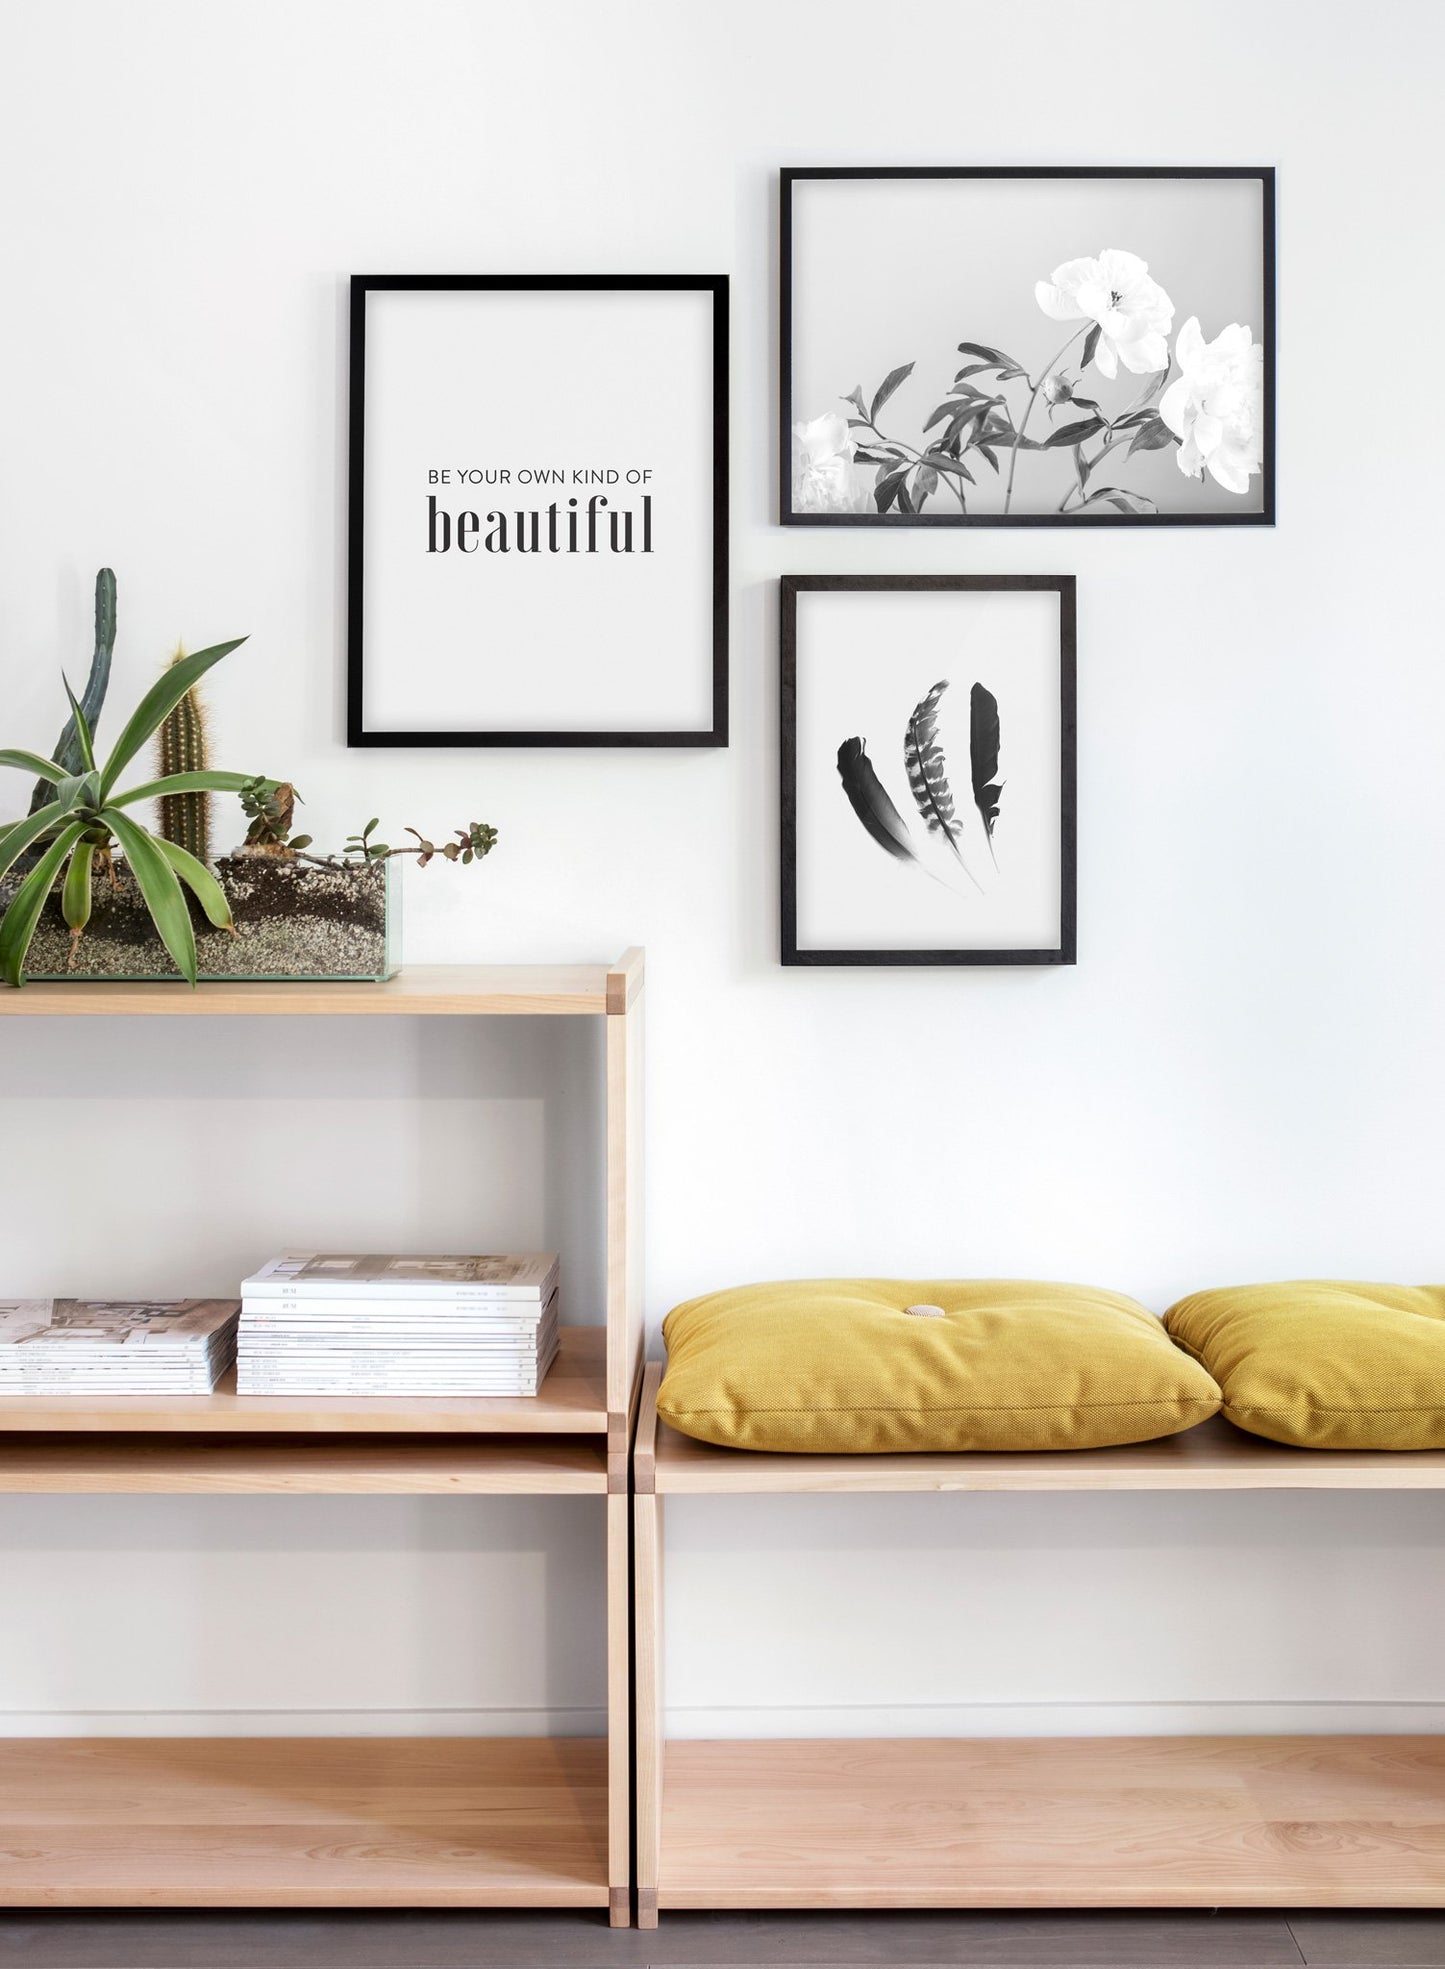 Scandinavian poster with black and white graphic typography design of Be your own kind of beautiful - Cozy living room yellow nook